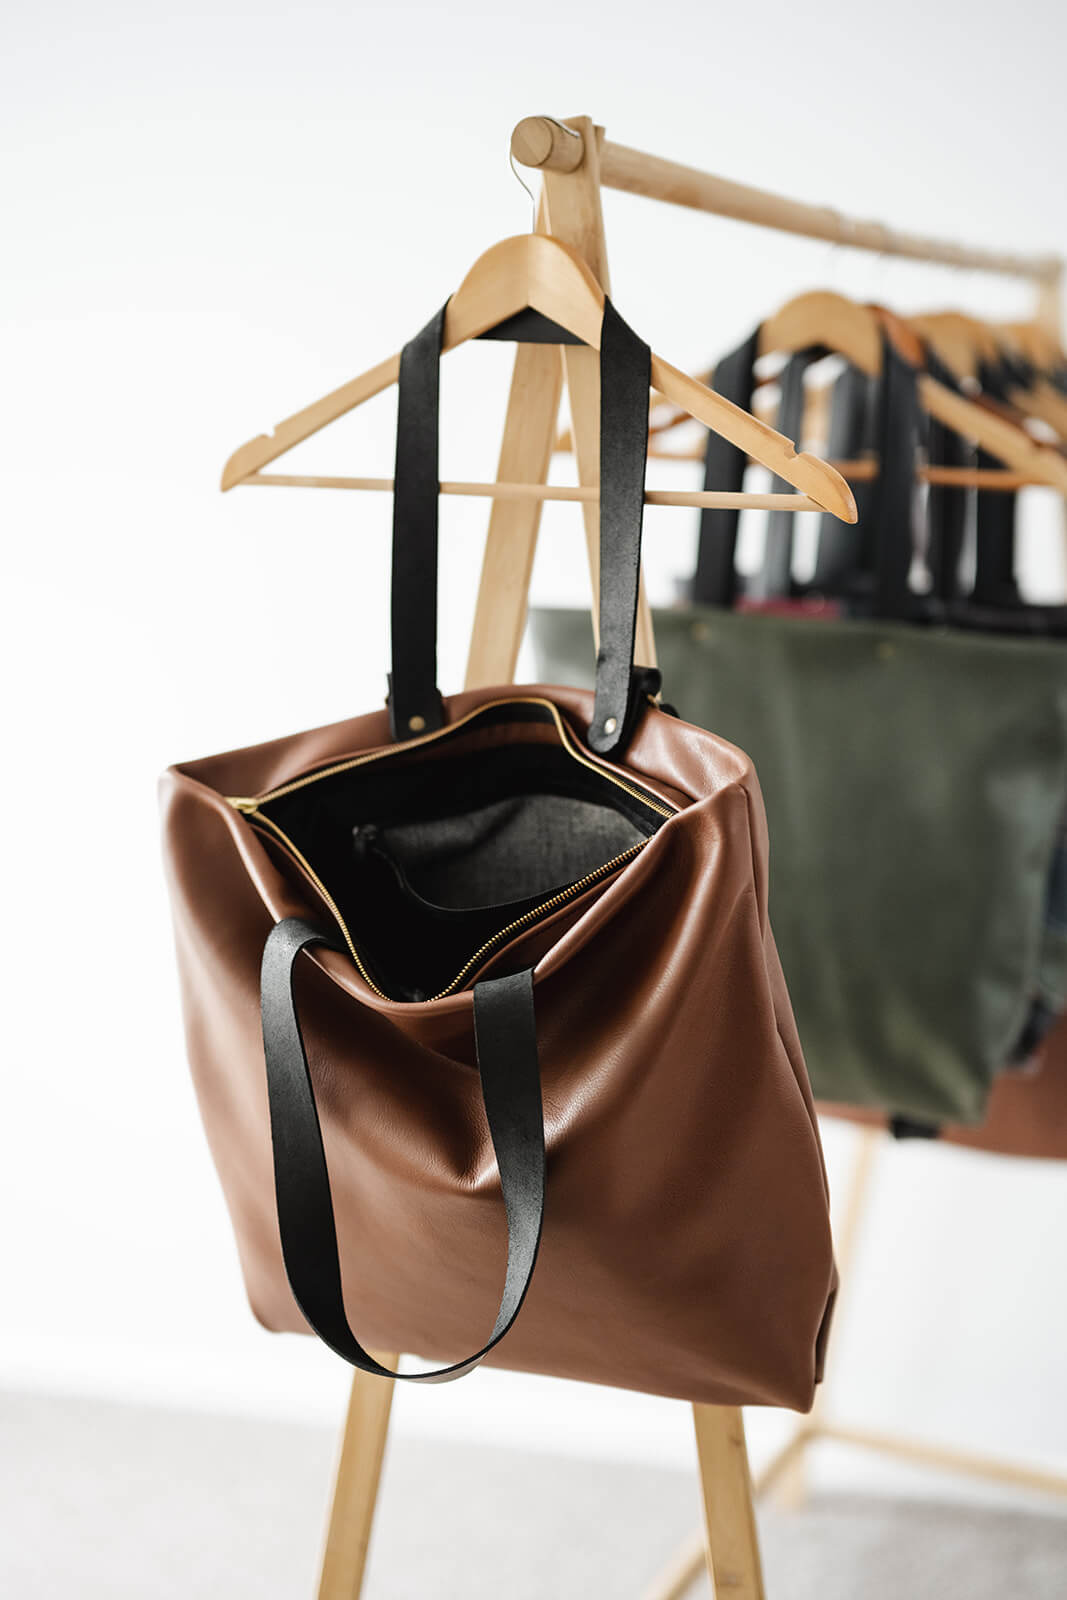 Tan Leather Backpack & Tote in Ella Jackson brand hanging on timber clothes rack as a tote and showing open bag, black straps, gold zip and internal pocket with white and black commercial fabric.